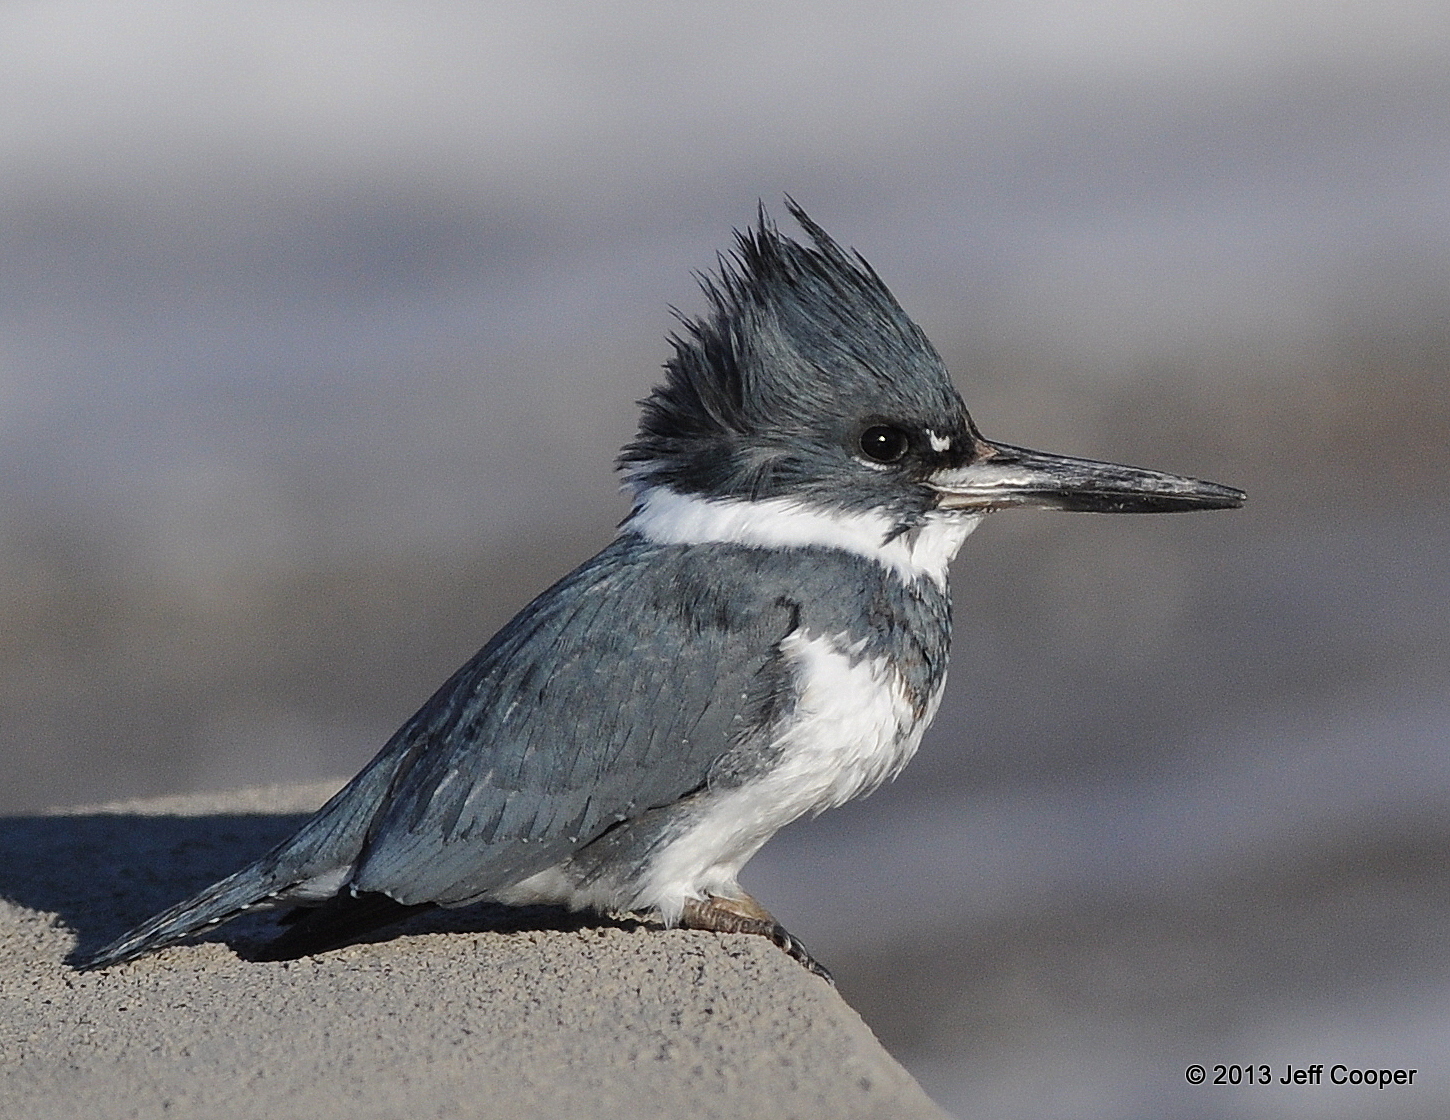 NeoVista Birds and Wildlife: King For The Day: Belted Kingfisher Male & Female